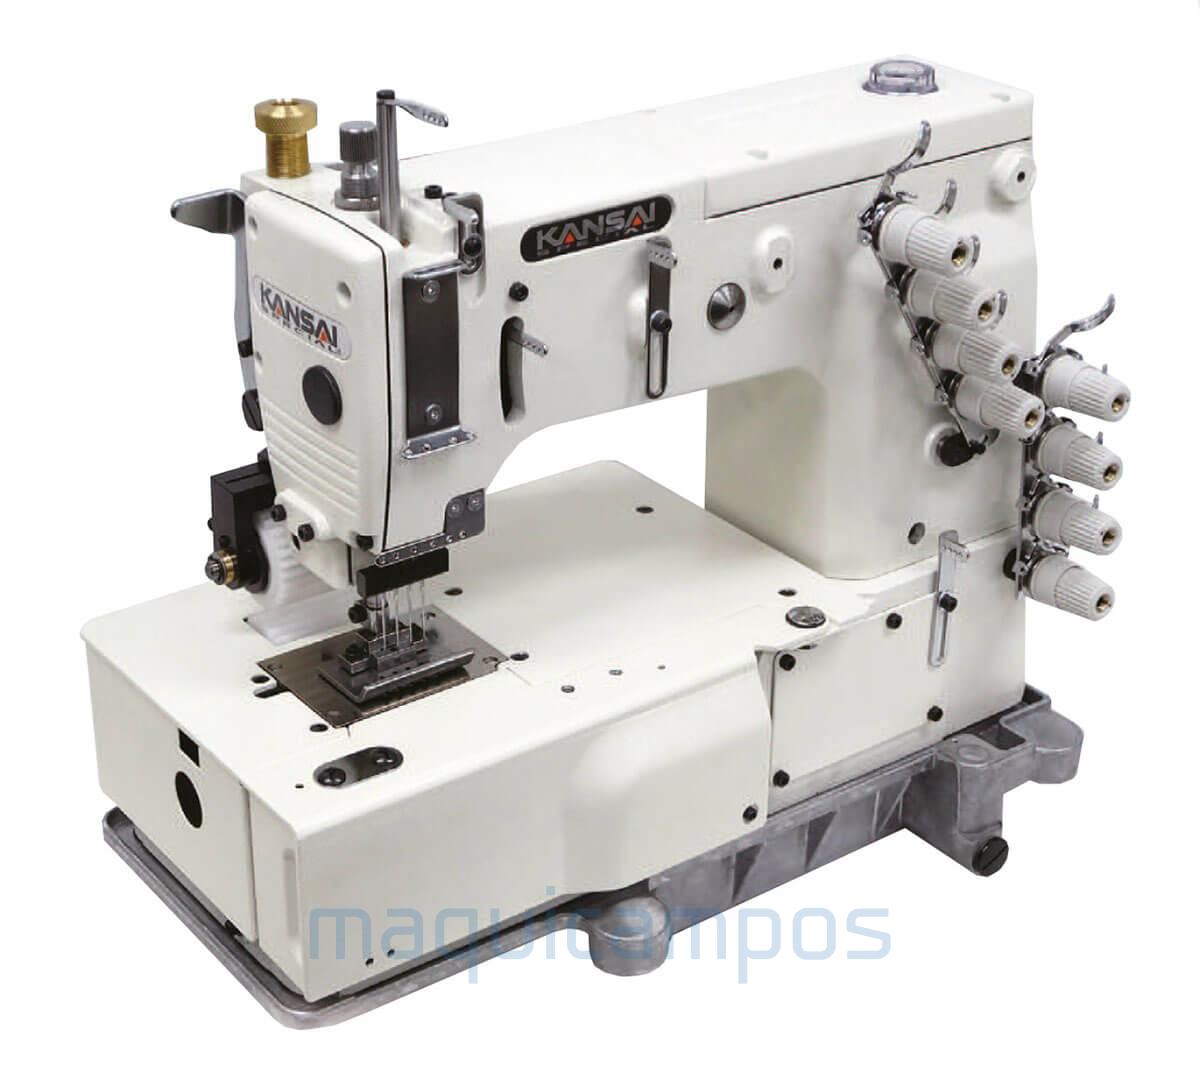 Kansai Special DFB1404PMD Multiple Needle Sewing Machine